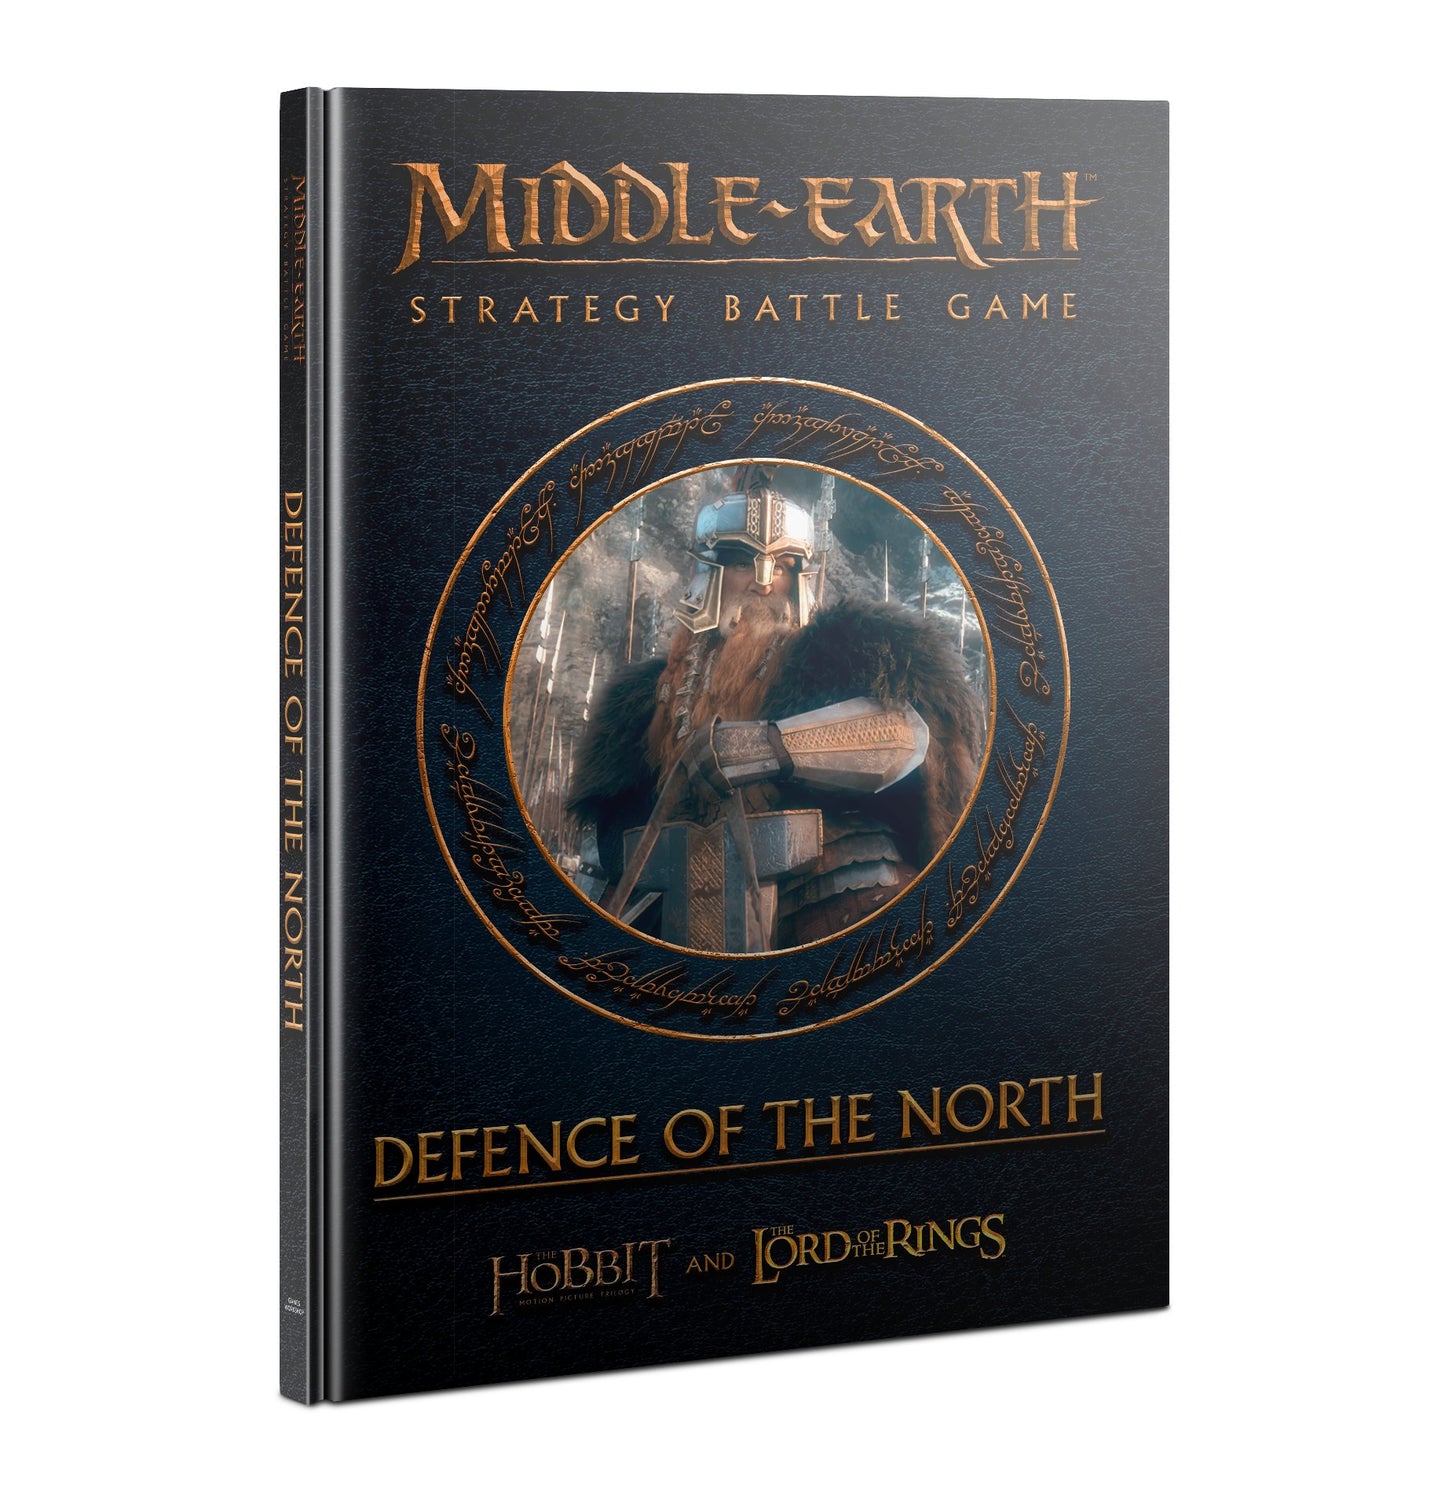 Middle-Earth Strategy Battle Game: Defence of the North